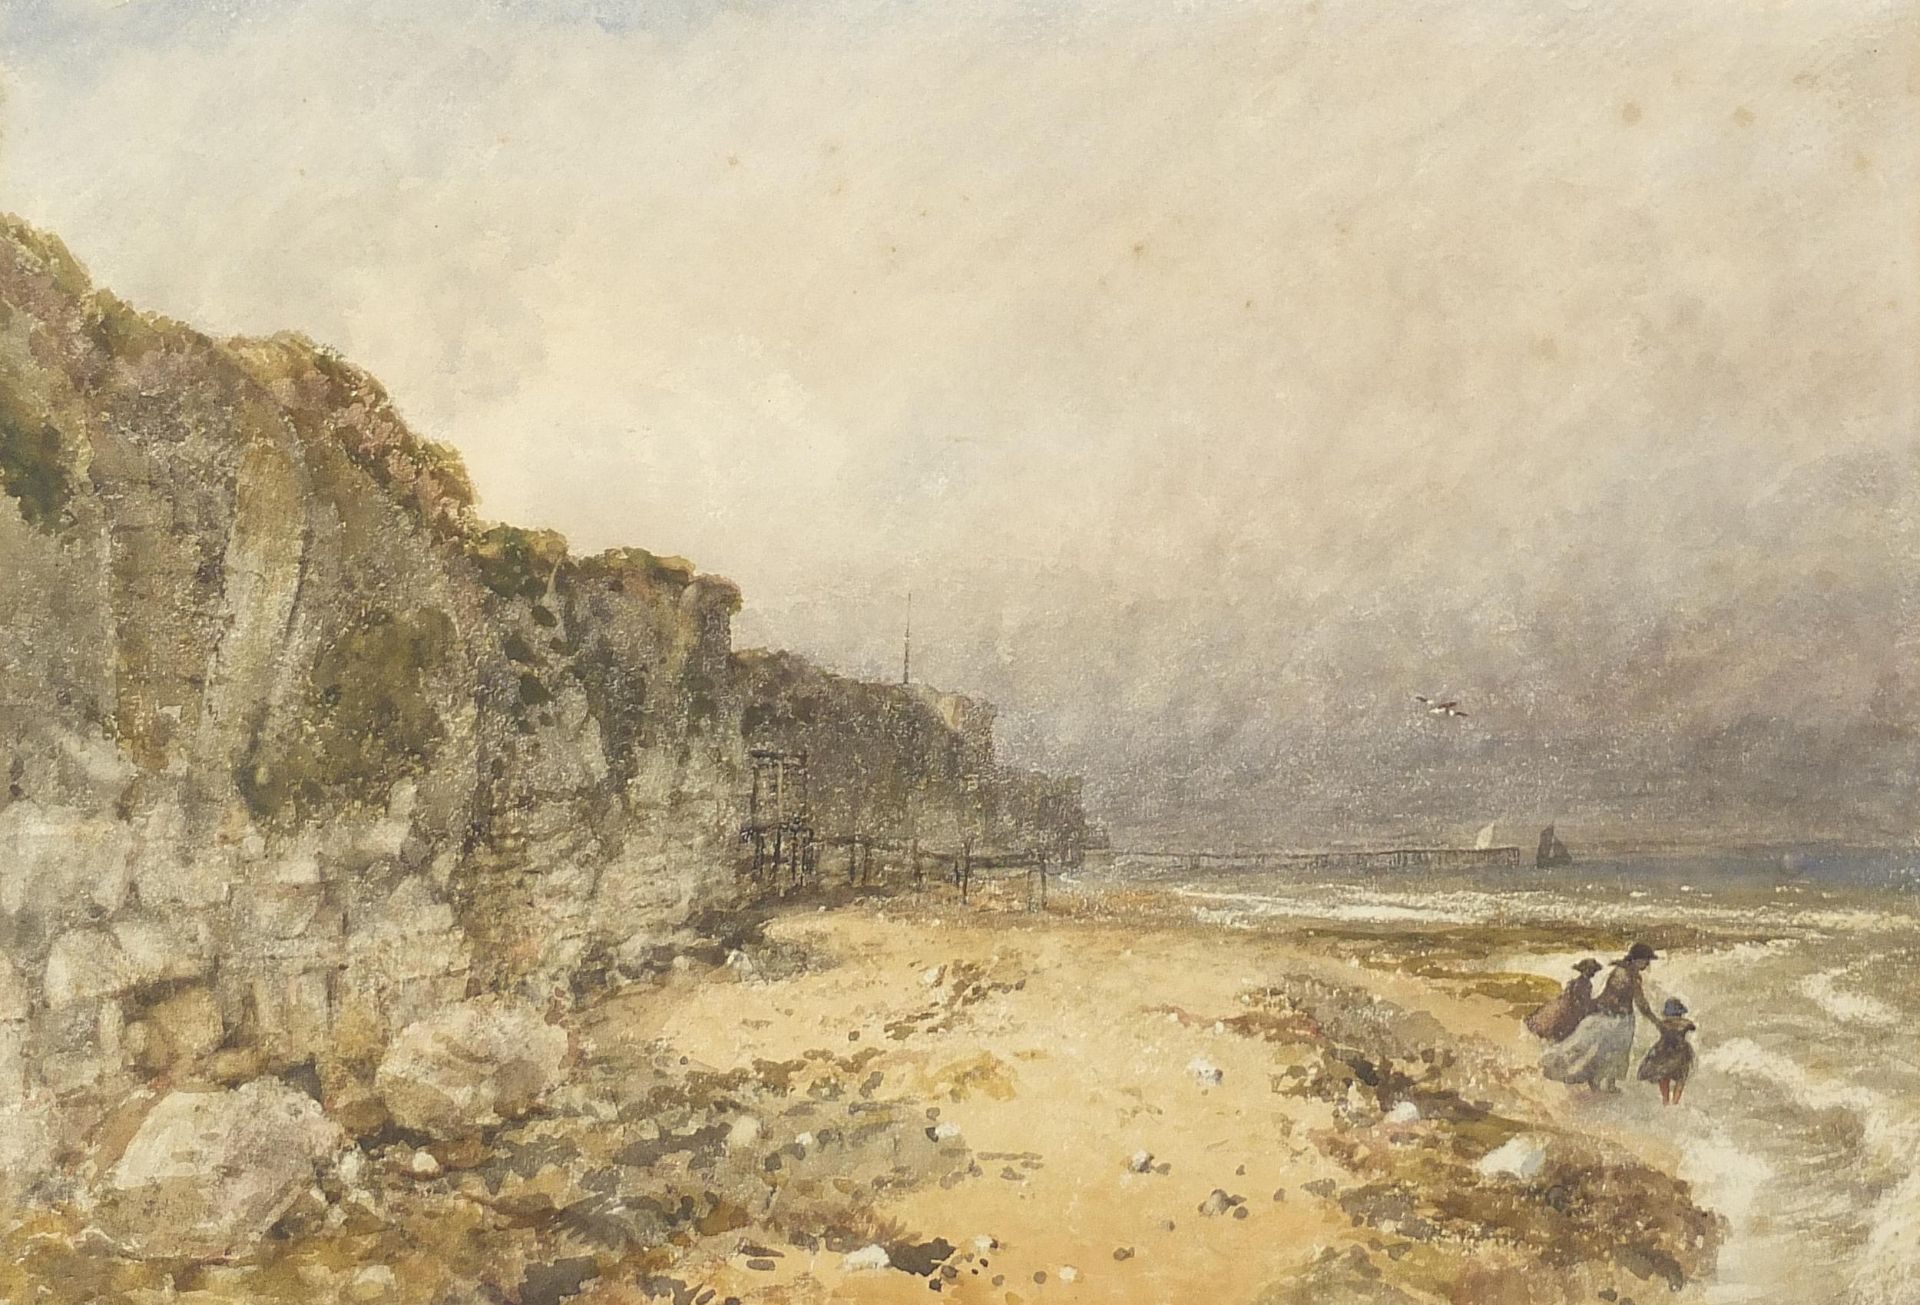 James Price - Stormy day, Dover coast, 19th century watercolour, inscribed verso, possibly Dover